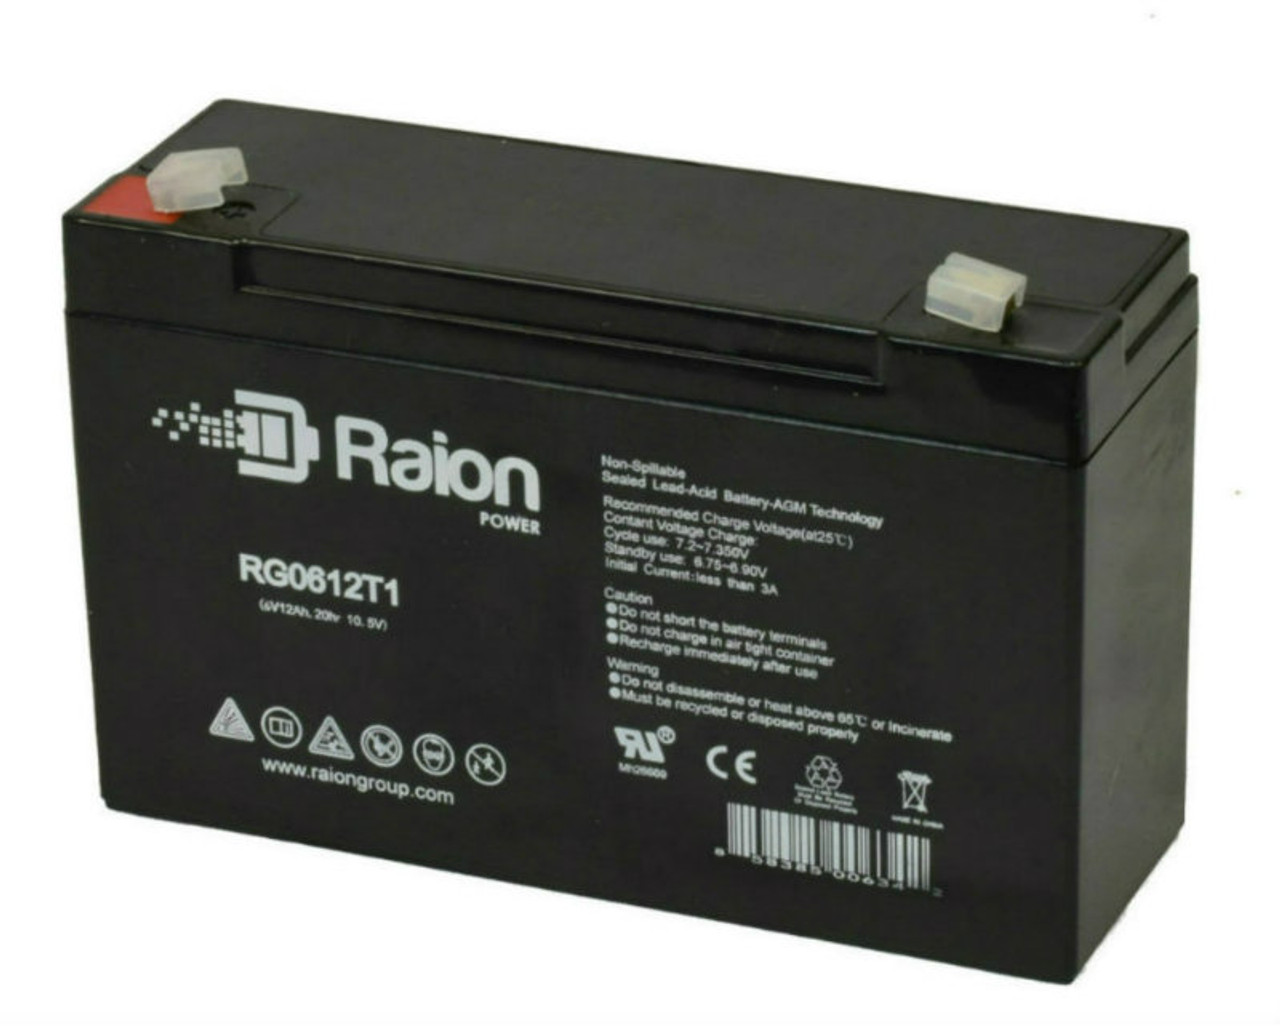 Raion Power RG06120T1 Replacement 6V 12Ah Emergency Light Battery for Chloride 12200A74